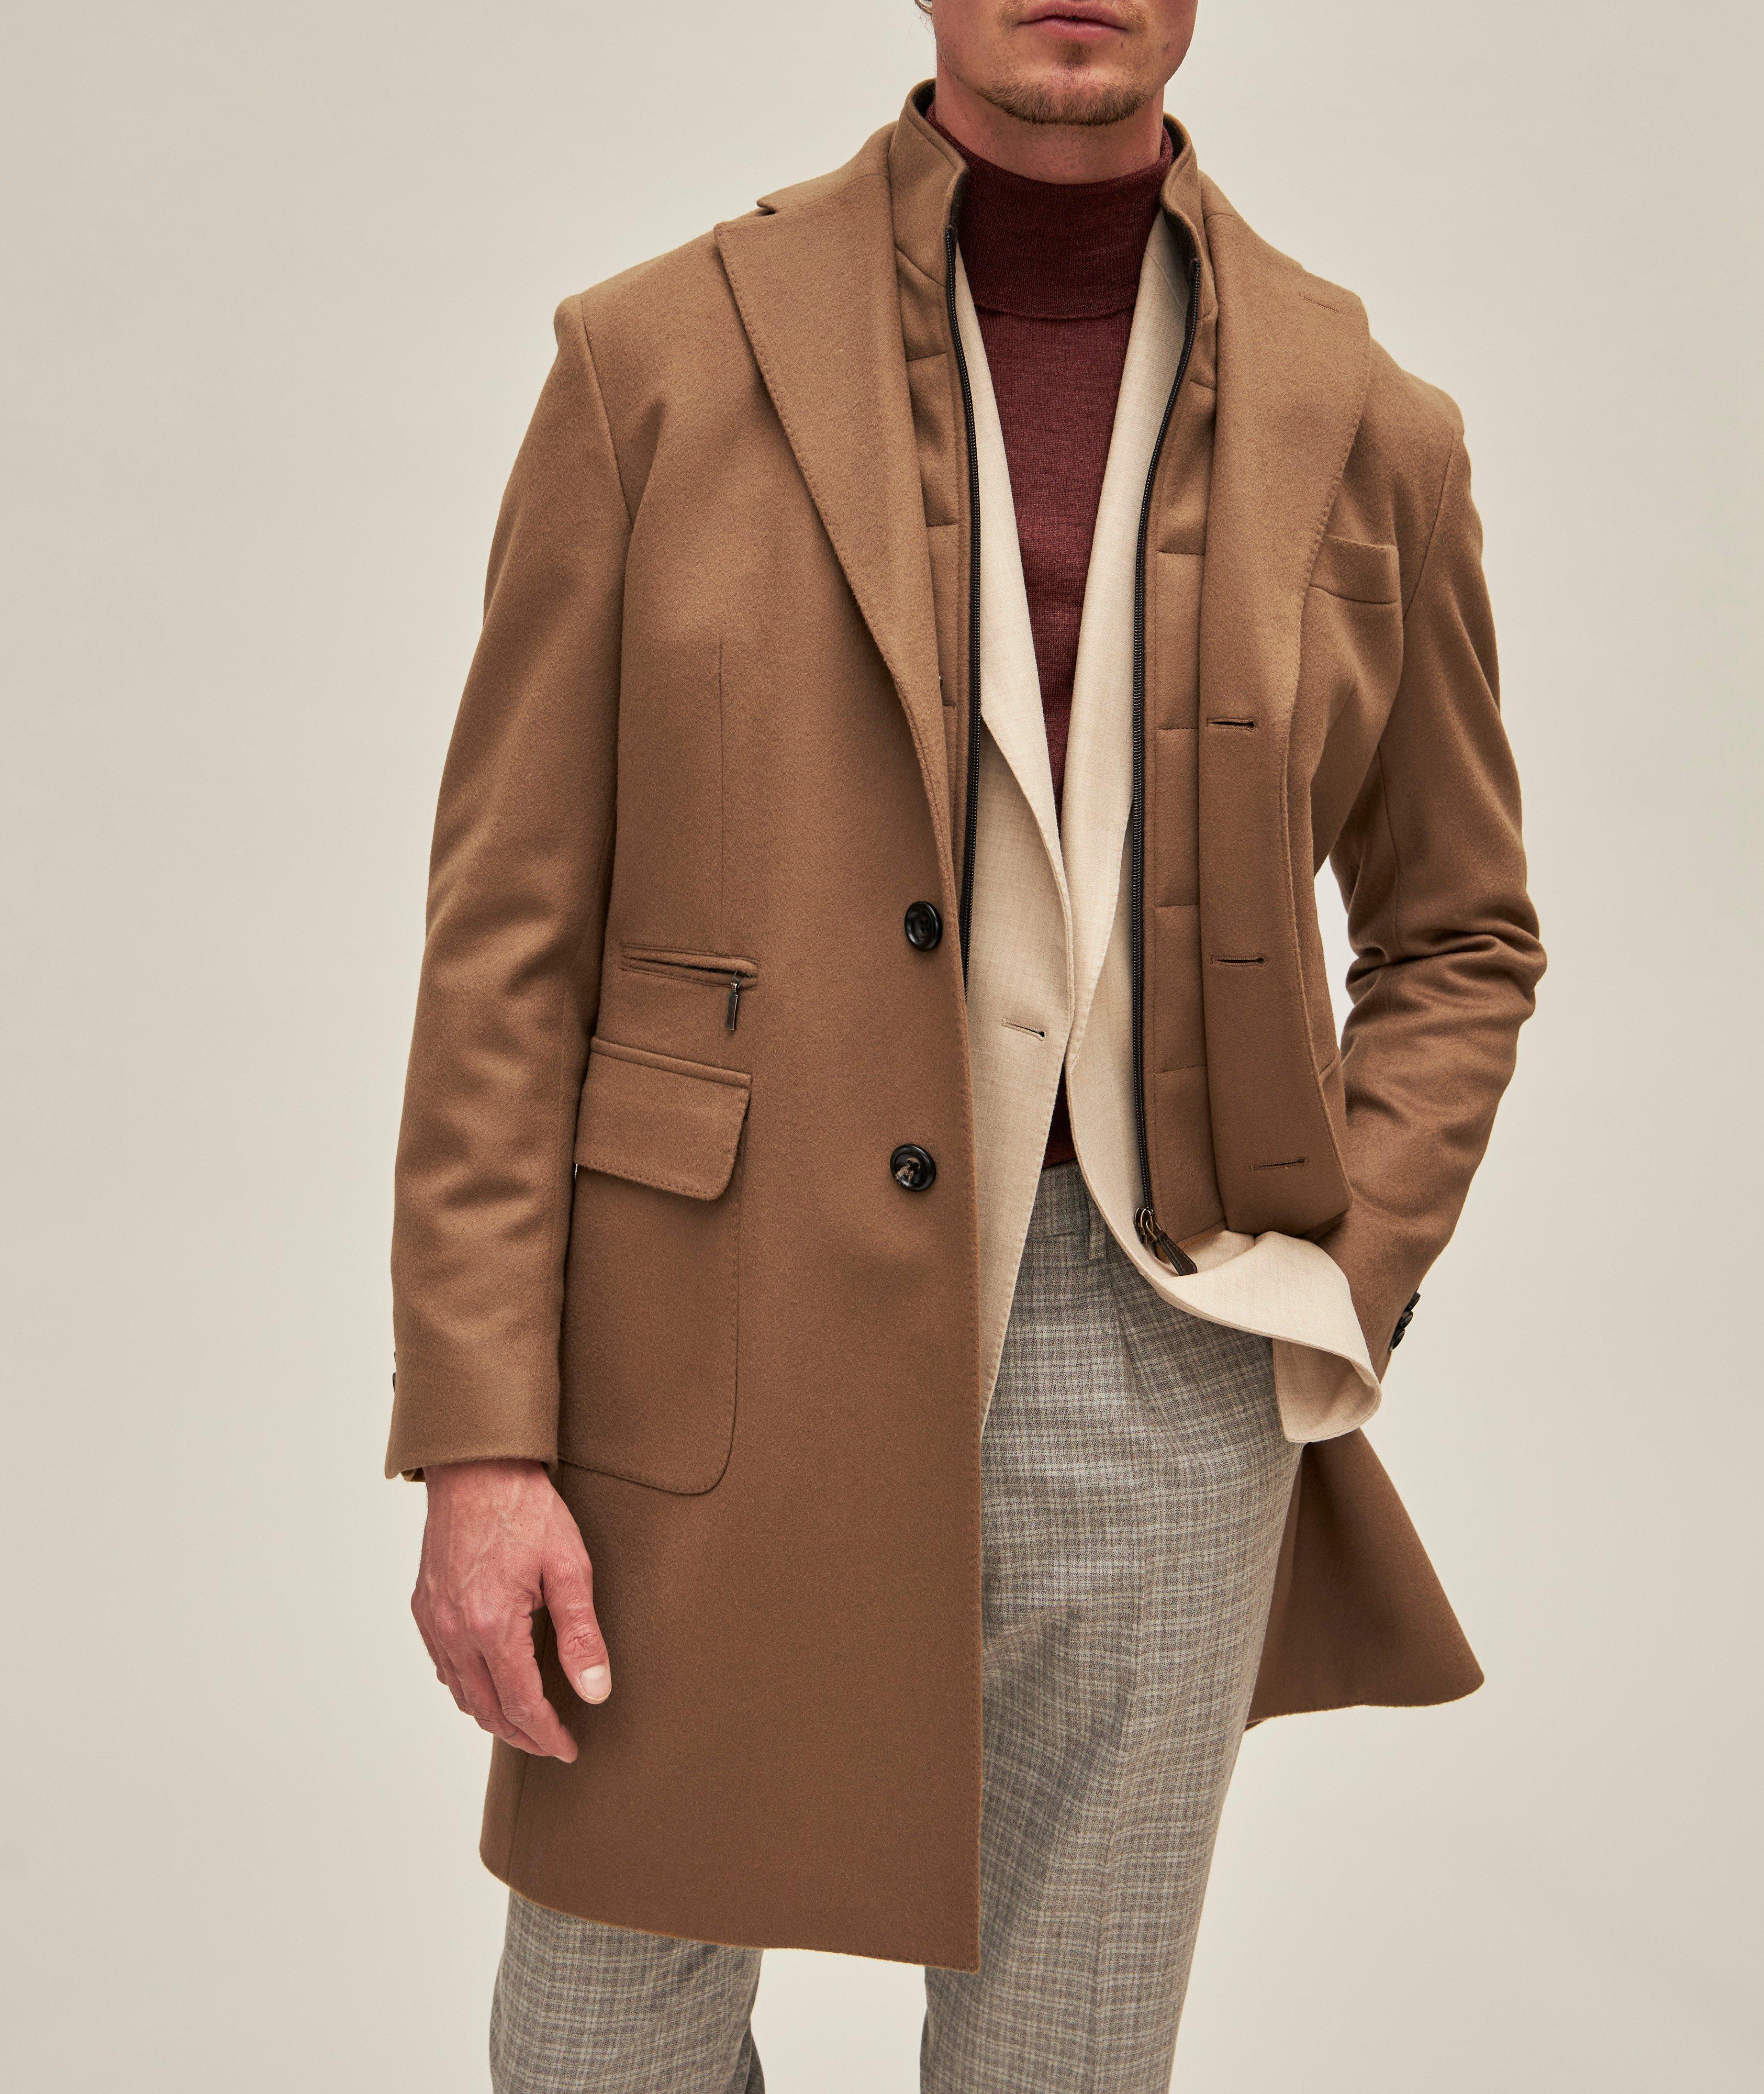 Wool-Cashmere Overcoat  image 2